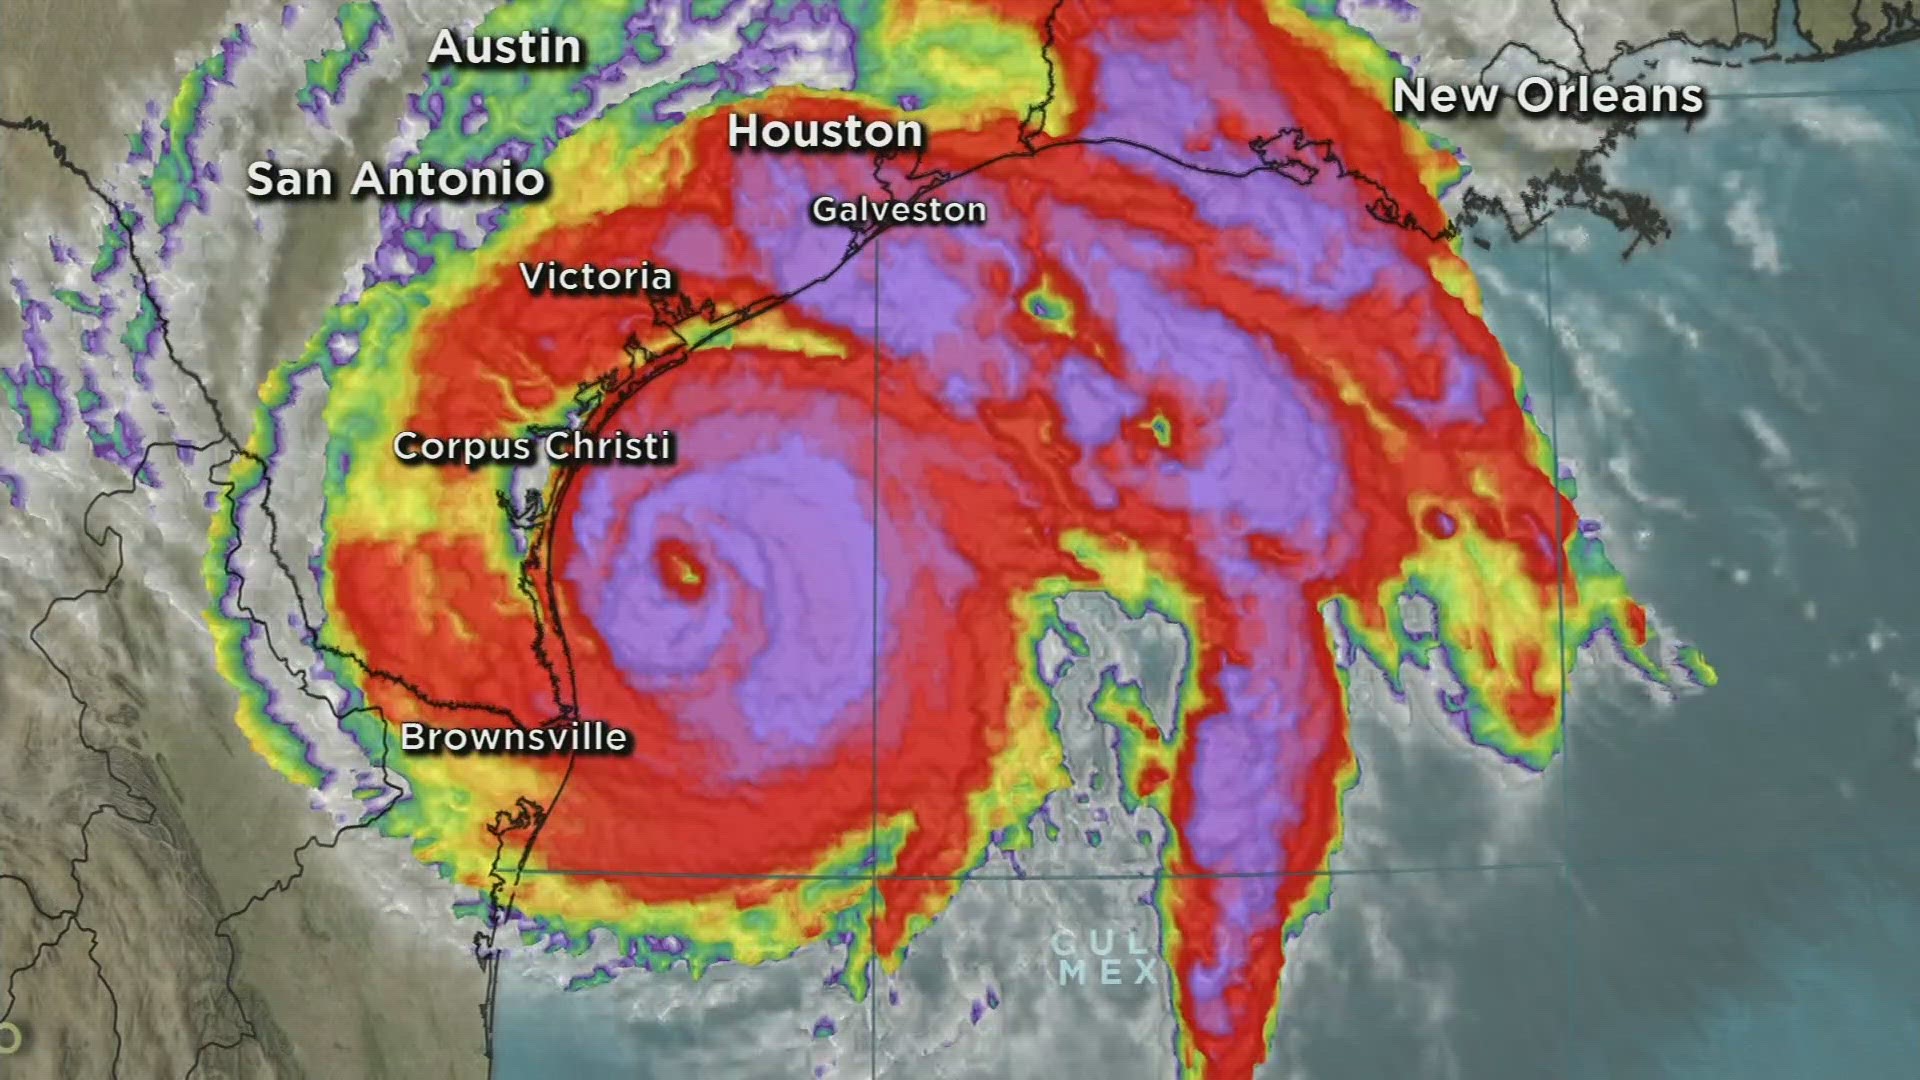 Currently, the scale ends at category five, with 157 mph winds — a new study suggests it should go up to category six.